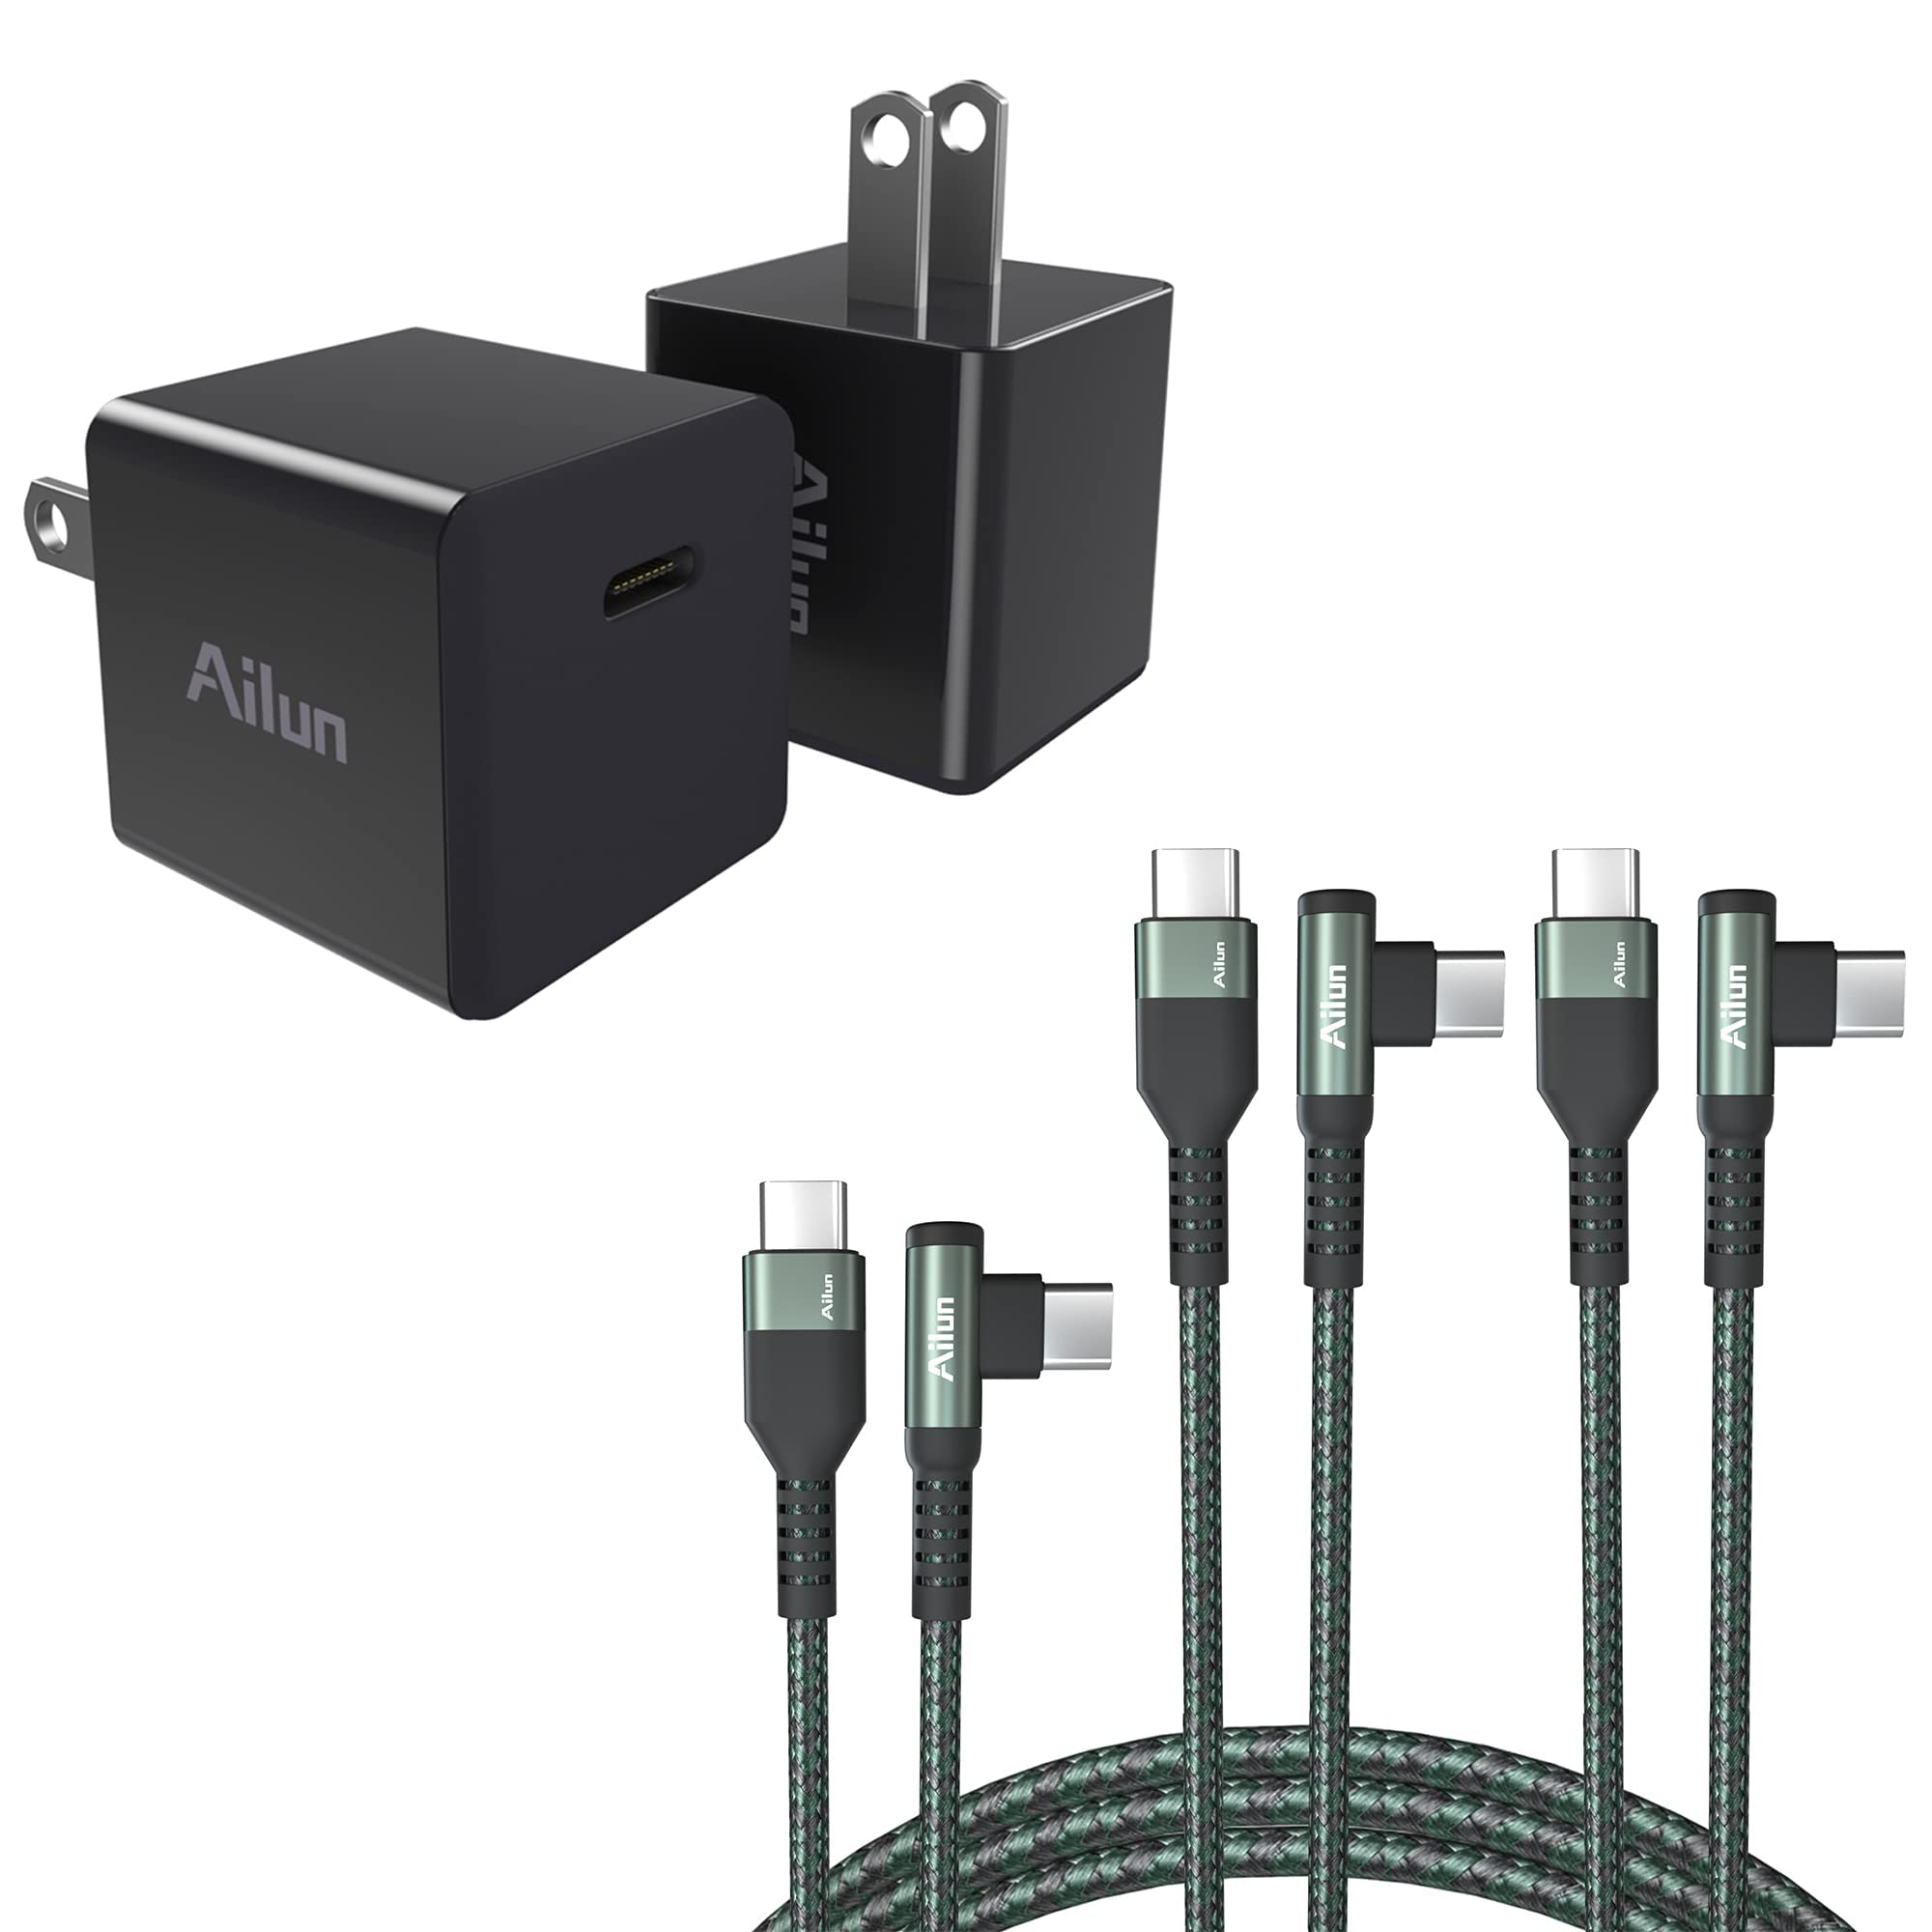 Ailun 2Pack 20W USB C Power Adapter,PD Port Thumb Wall Charger Block Fast Charge Compatible with iPhone 13/12 Pro Max/12 Mini/11,Galaxy,Pixel 4/3, iPad Pro (Cable Not Included) Black and Ailun USB C t